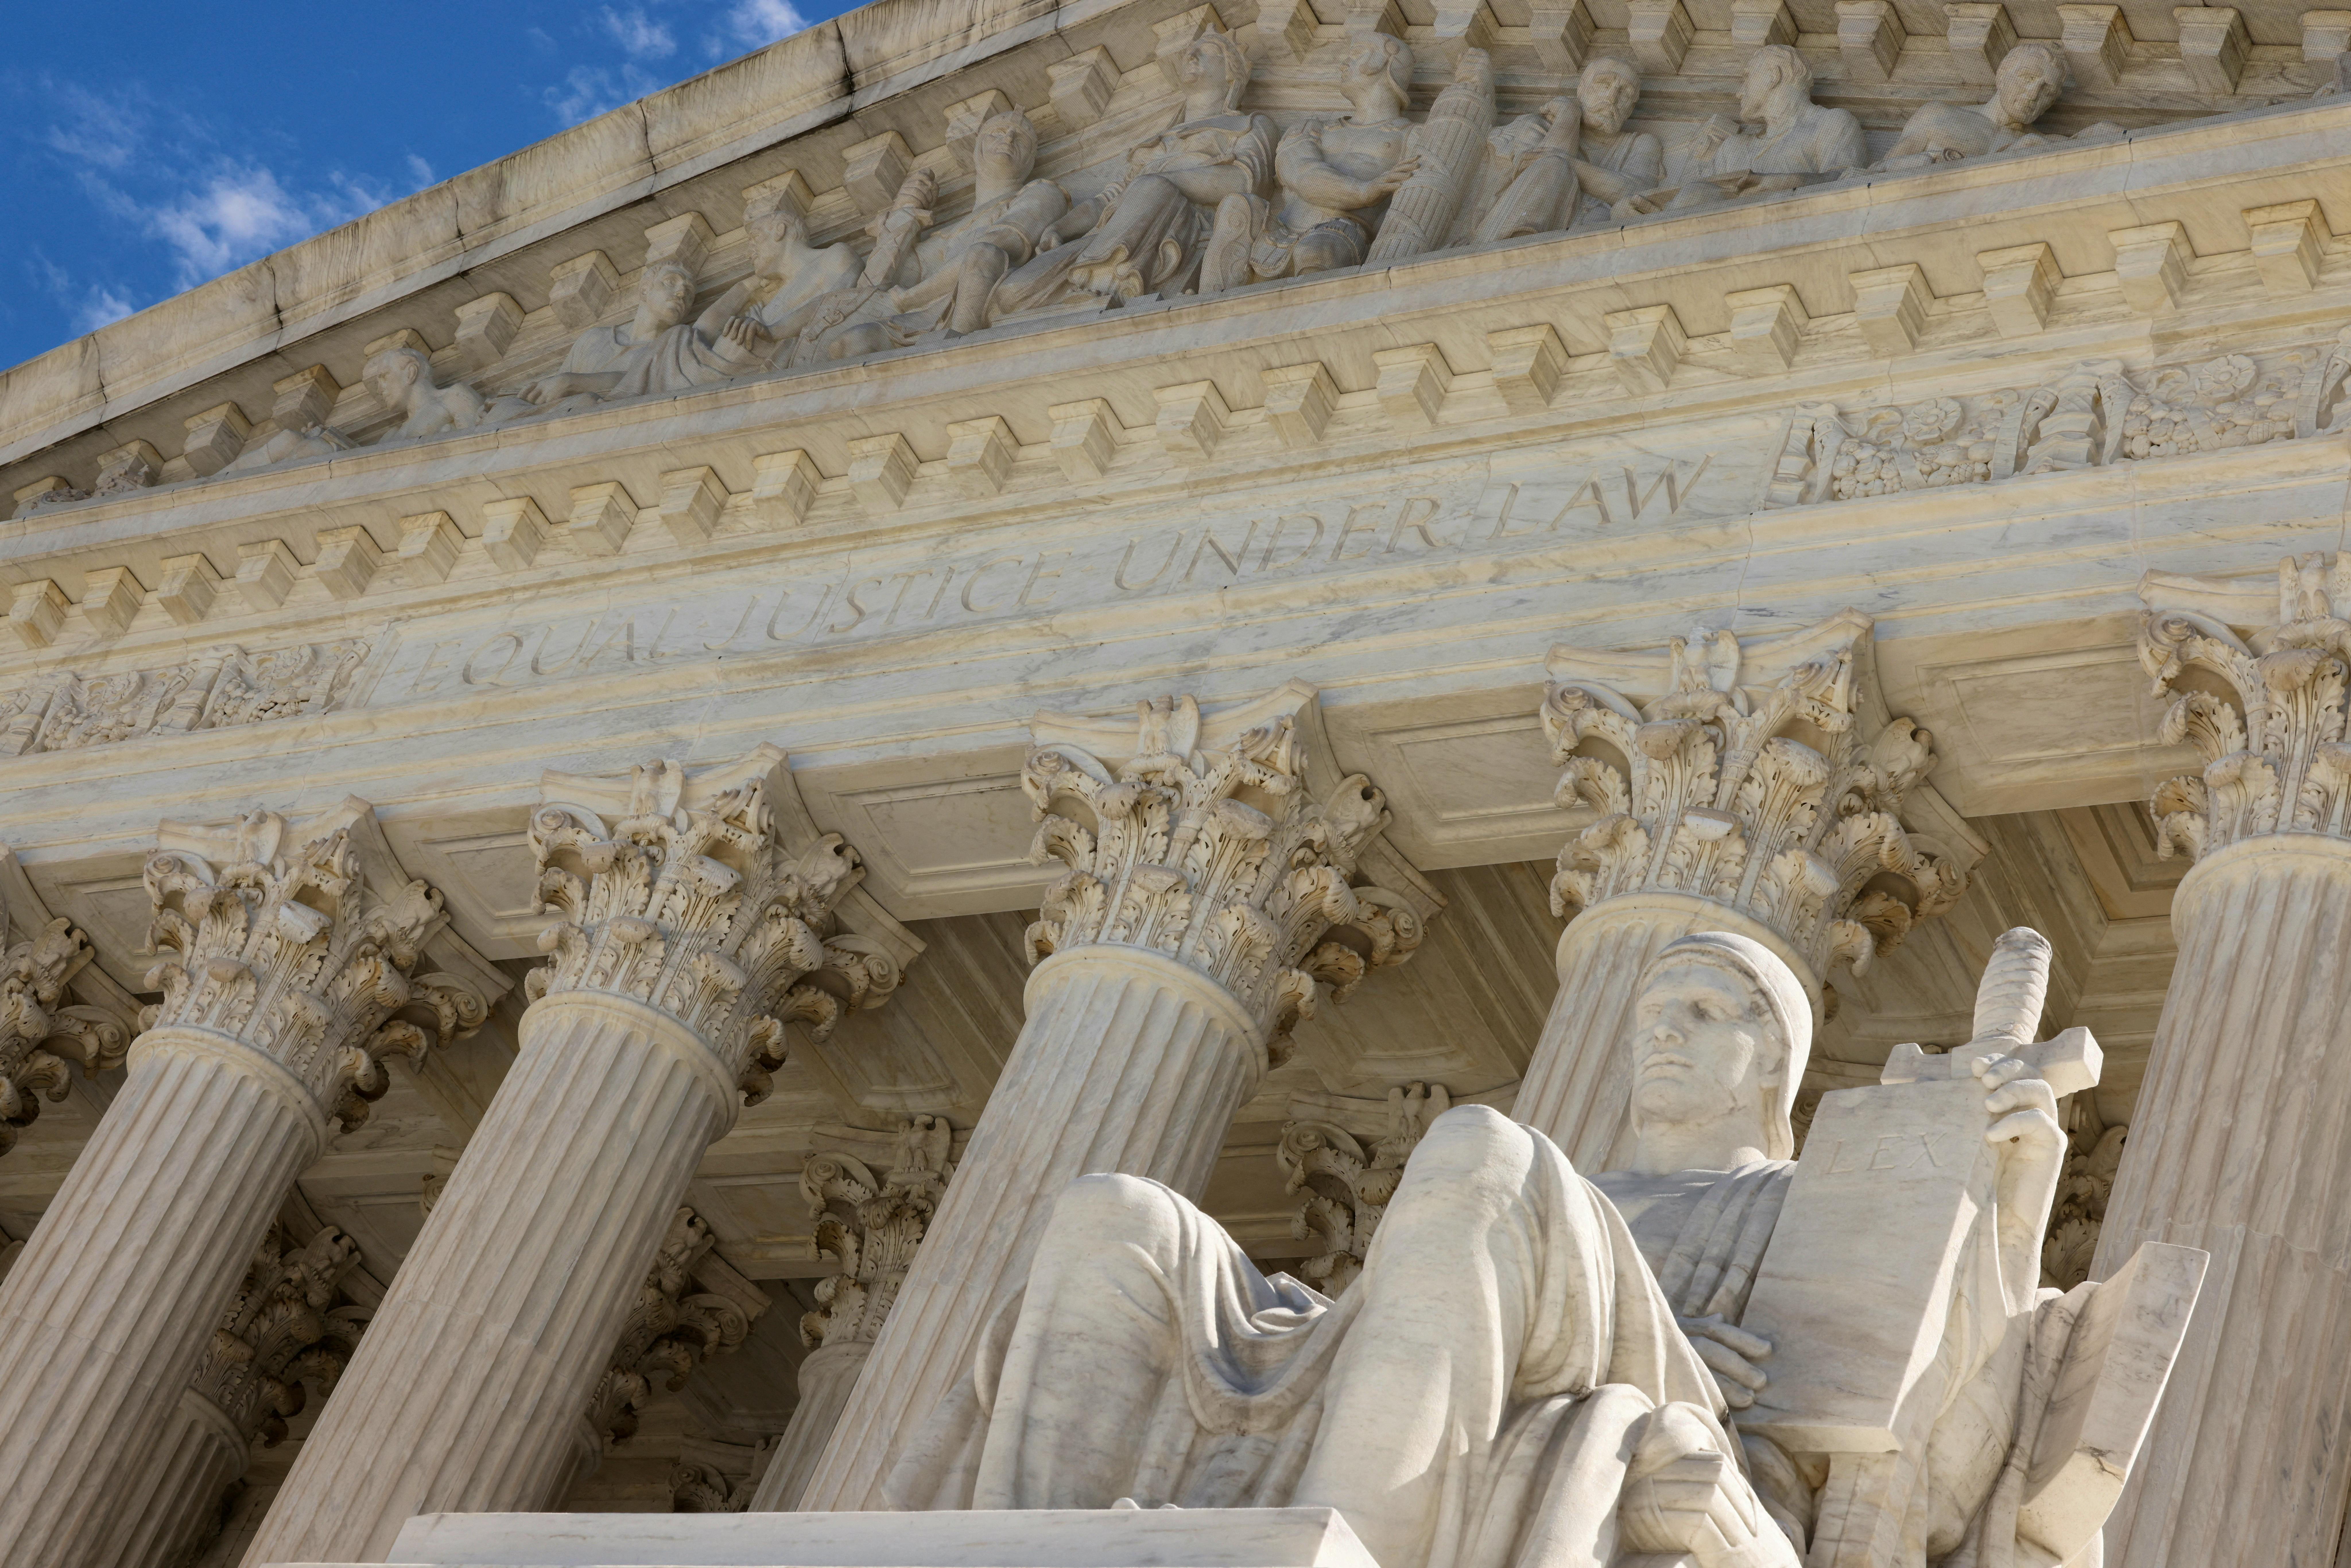 Key gun control measure in the crosshairs at US Supreme Court